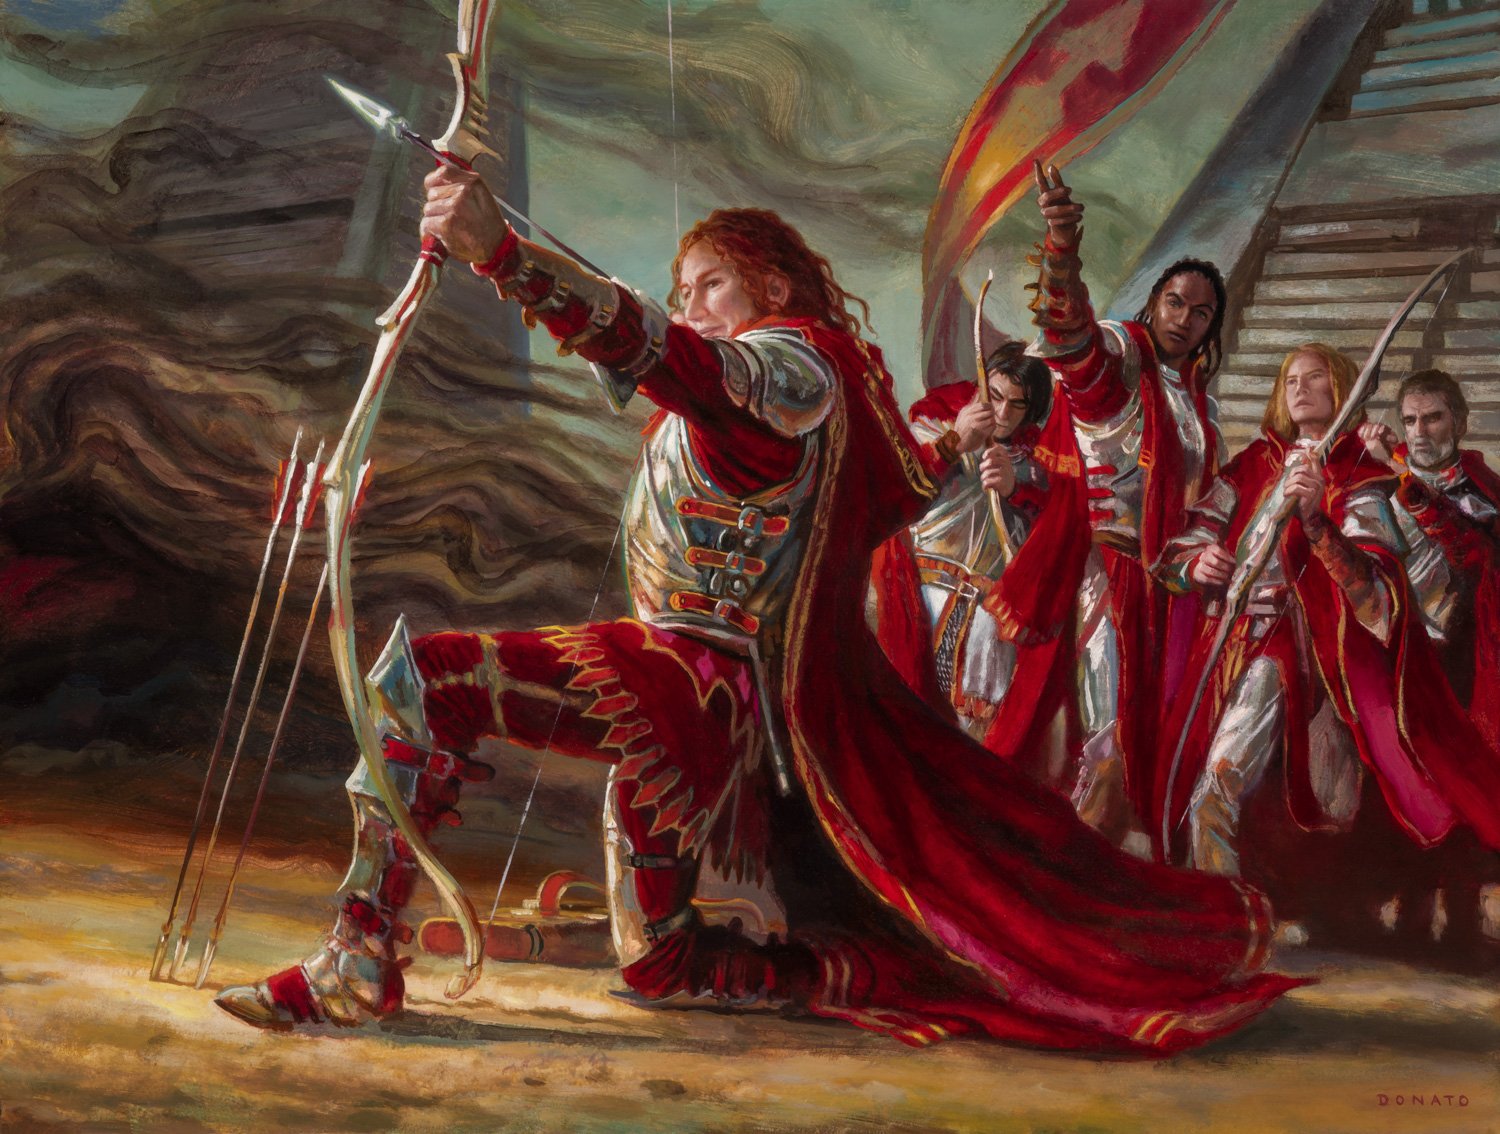 Champions of Archery
Heroes of the Realms 2019
16" x 20"  Oil on Panel
private collection